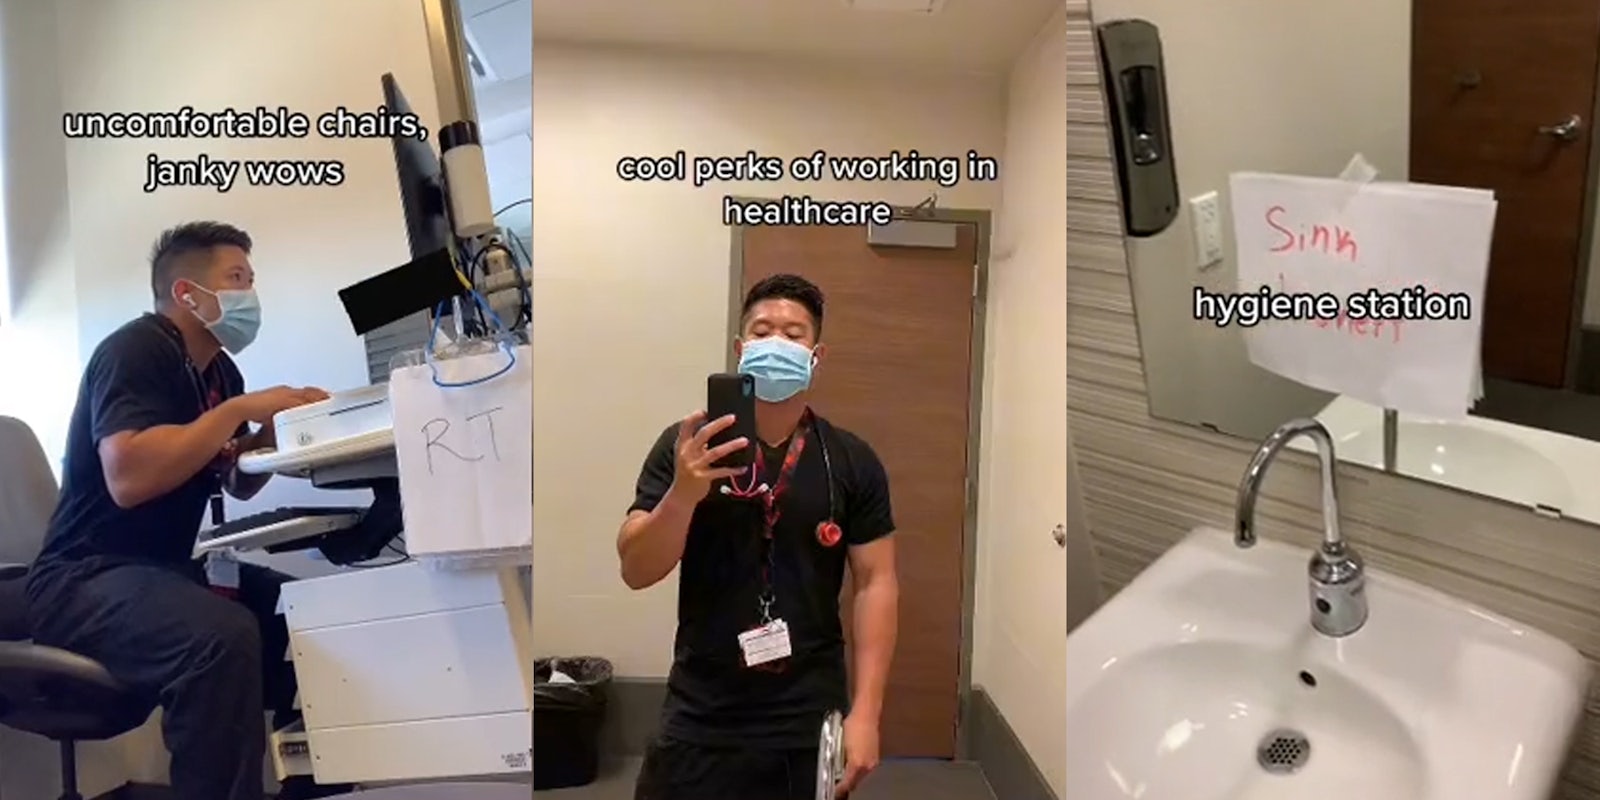 healthcare worker sitting in chair at desk caption 'uncomfortable chairs, janky wows' (l) healthcare worker posiing for mirror selfie caption 'cool perks of working in healthcare' (c) sink with paper taped to mirror 'Sink Broken' caption 'hygiene station' (r)